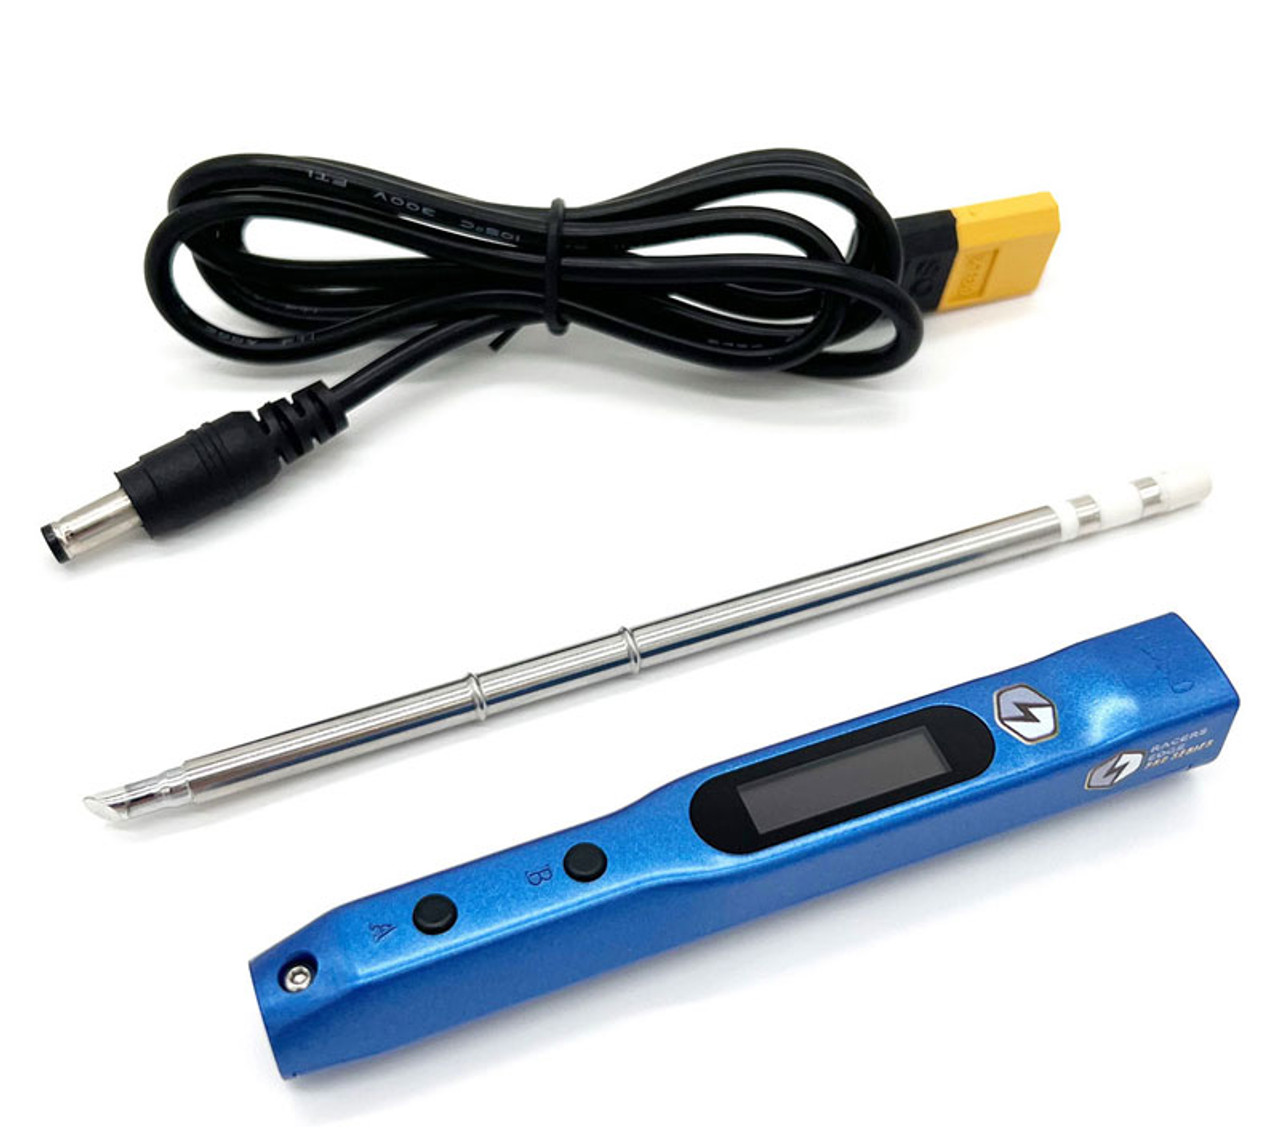 TS100 Soldering Iron - an iron for the bench and on the go